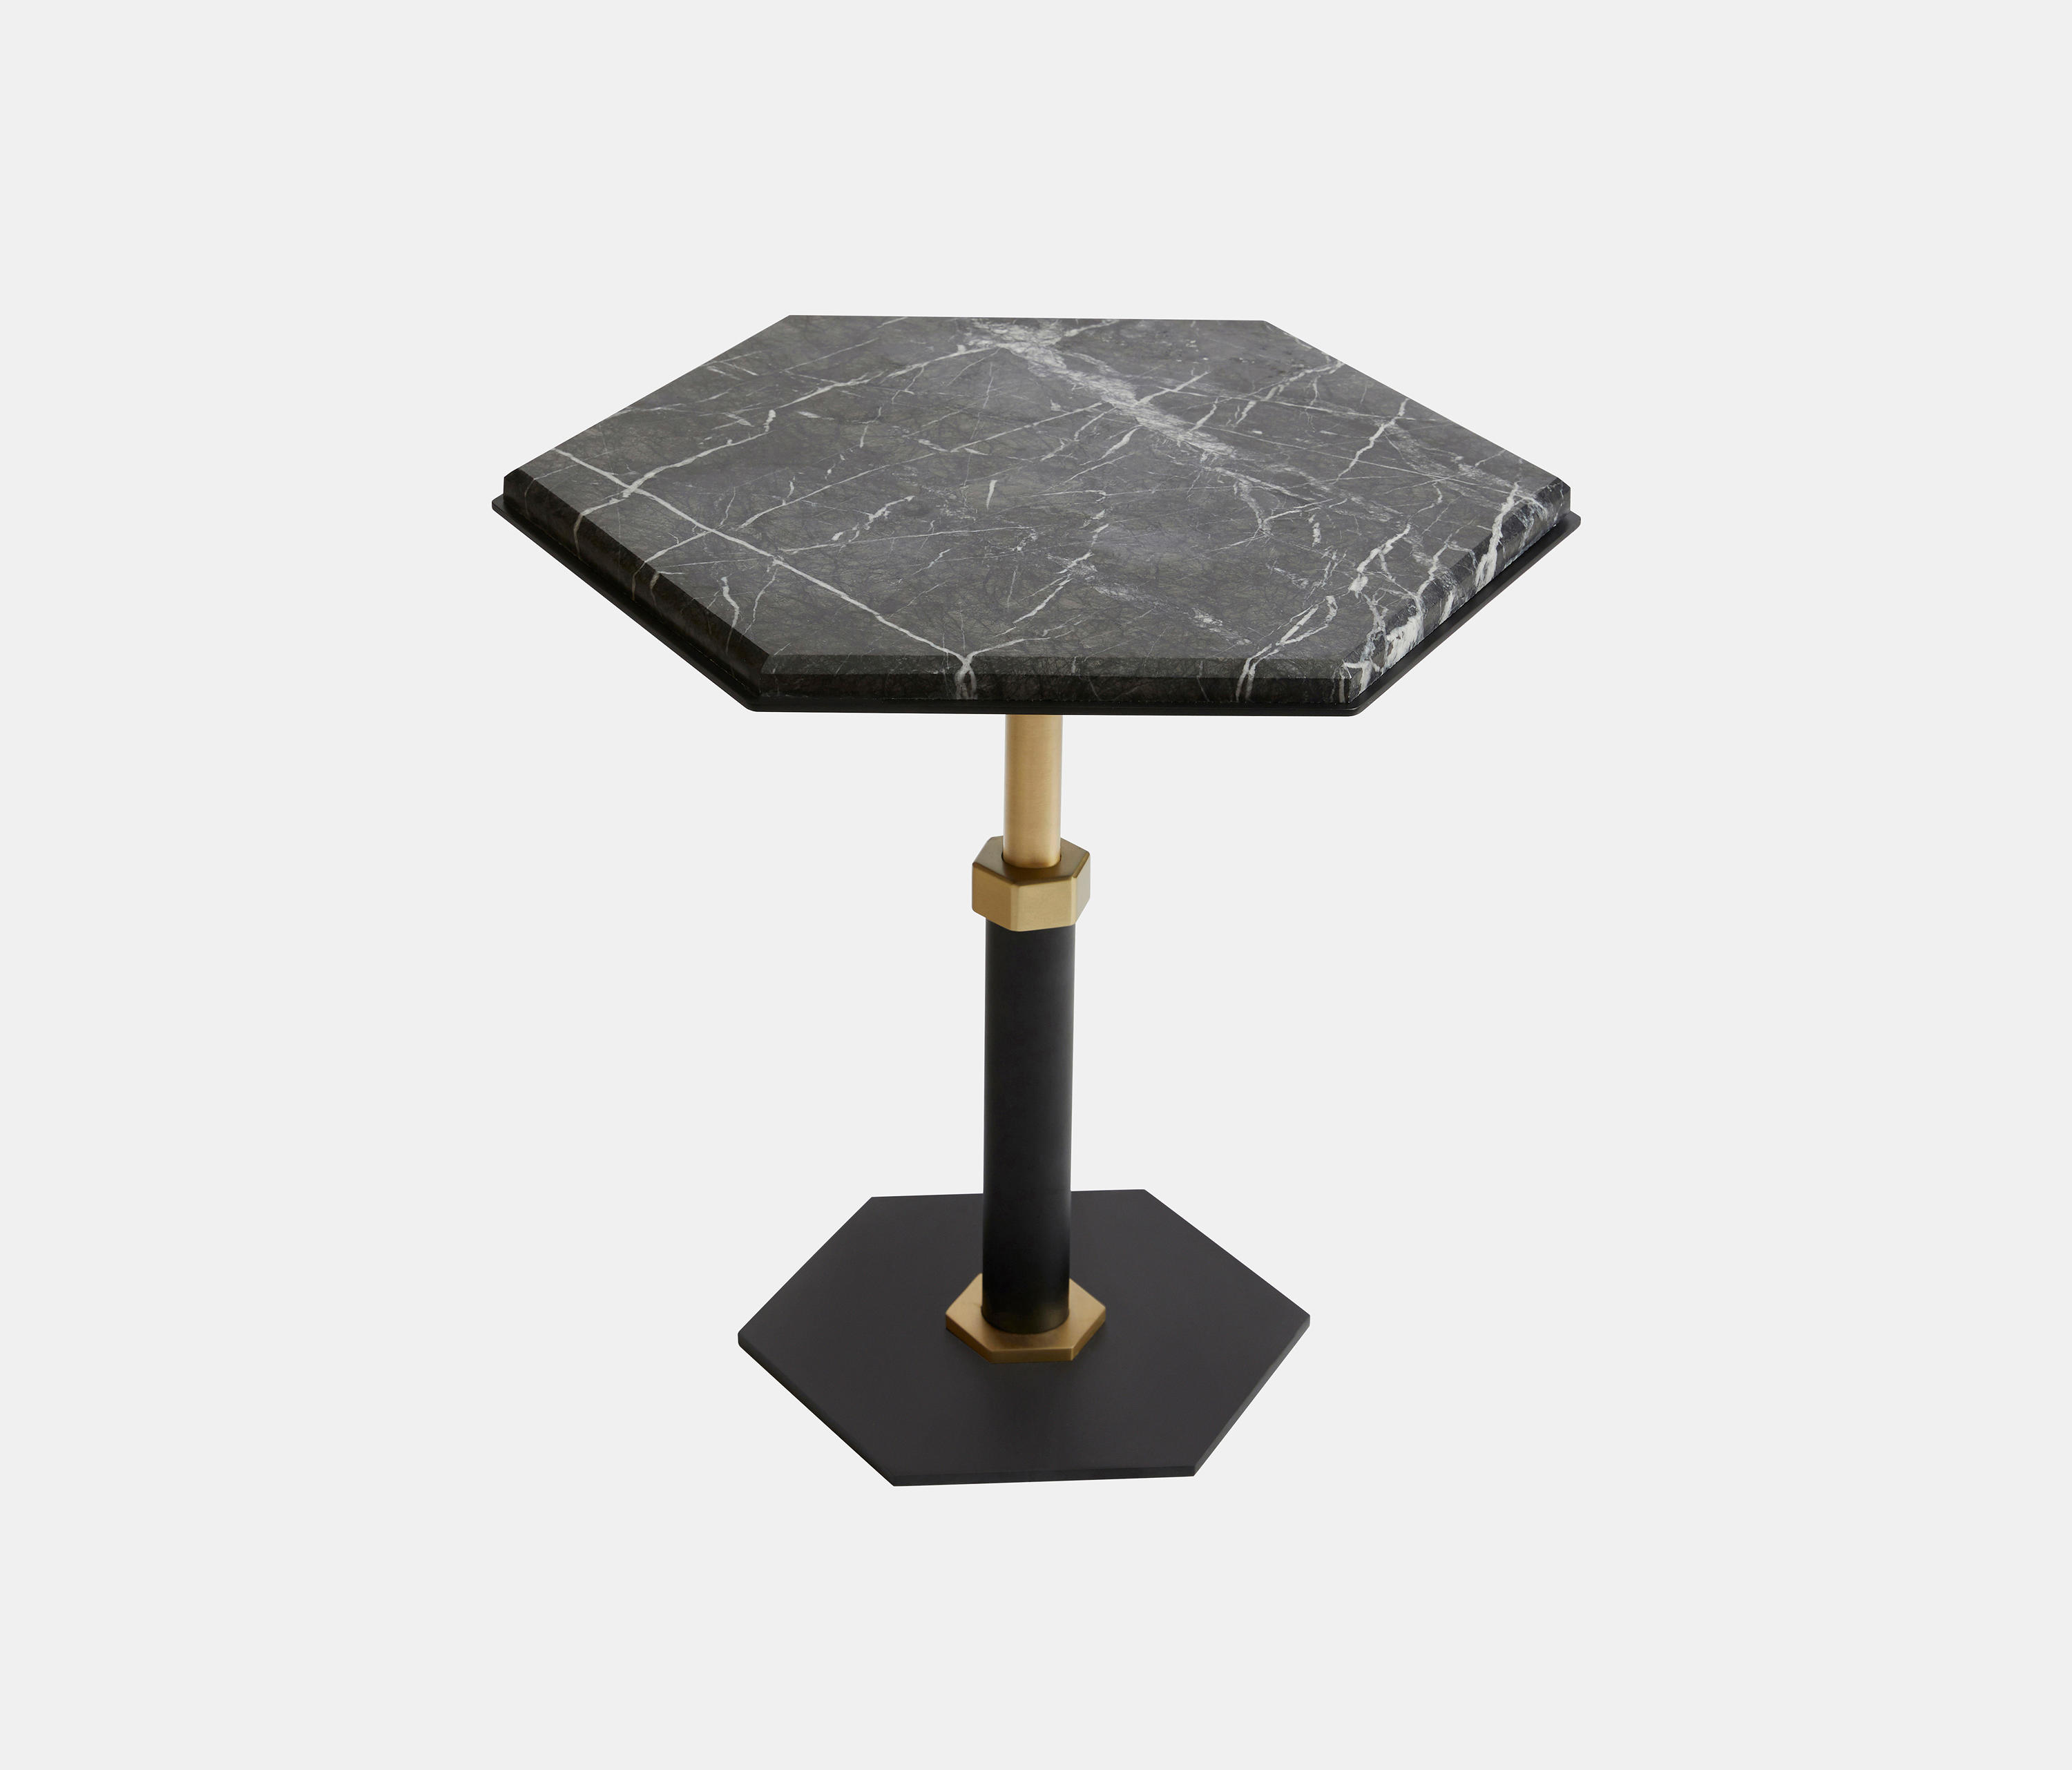 Pedestal Hexagon Side Table | Architonic